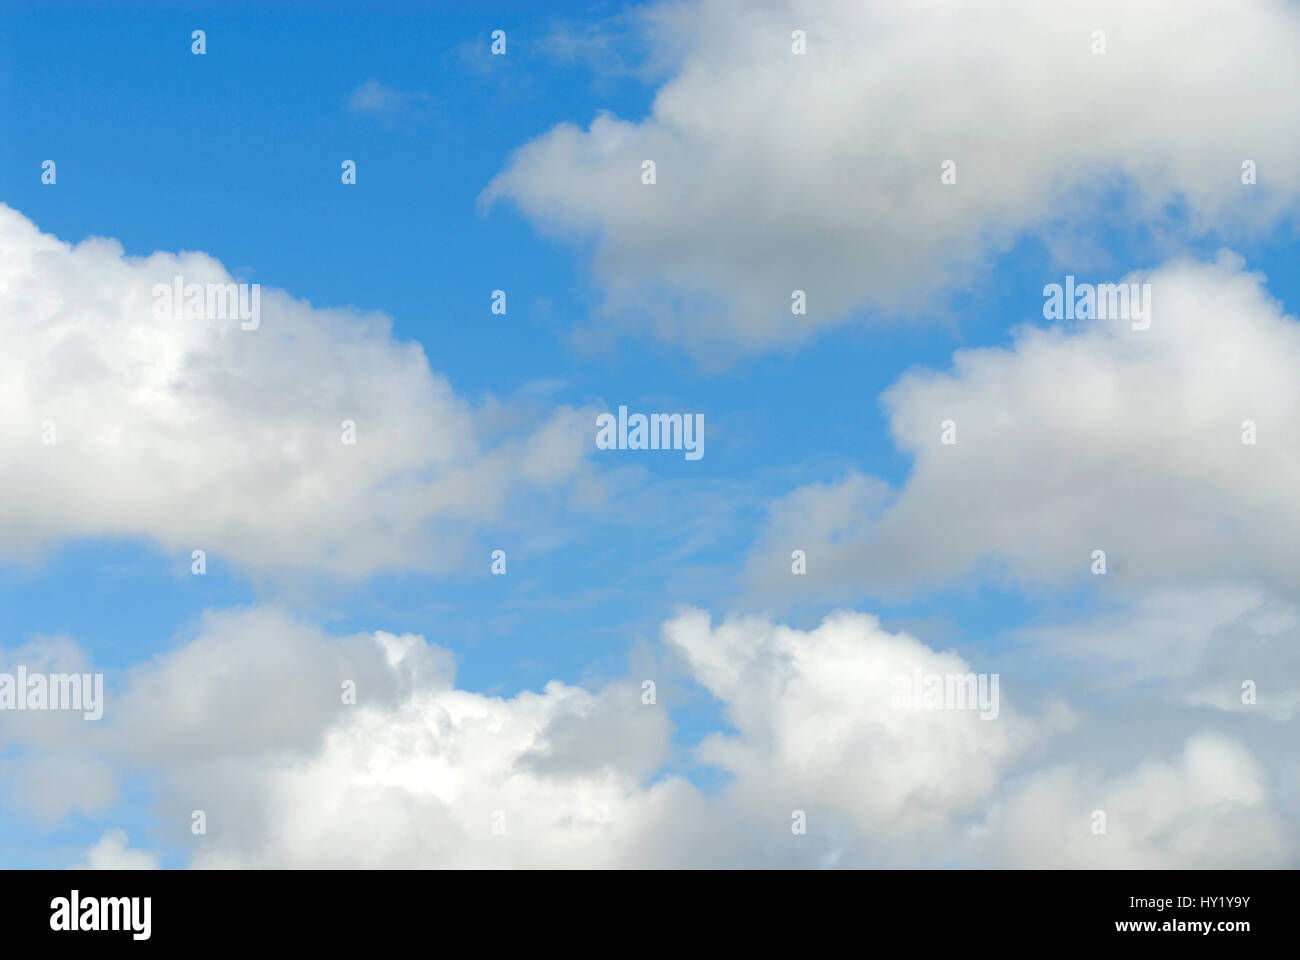 This stock photo shows a perfect  blue sky partly covered with cumulus clouds. The image was taken on a sunny morning. Stock Photo